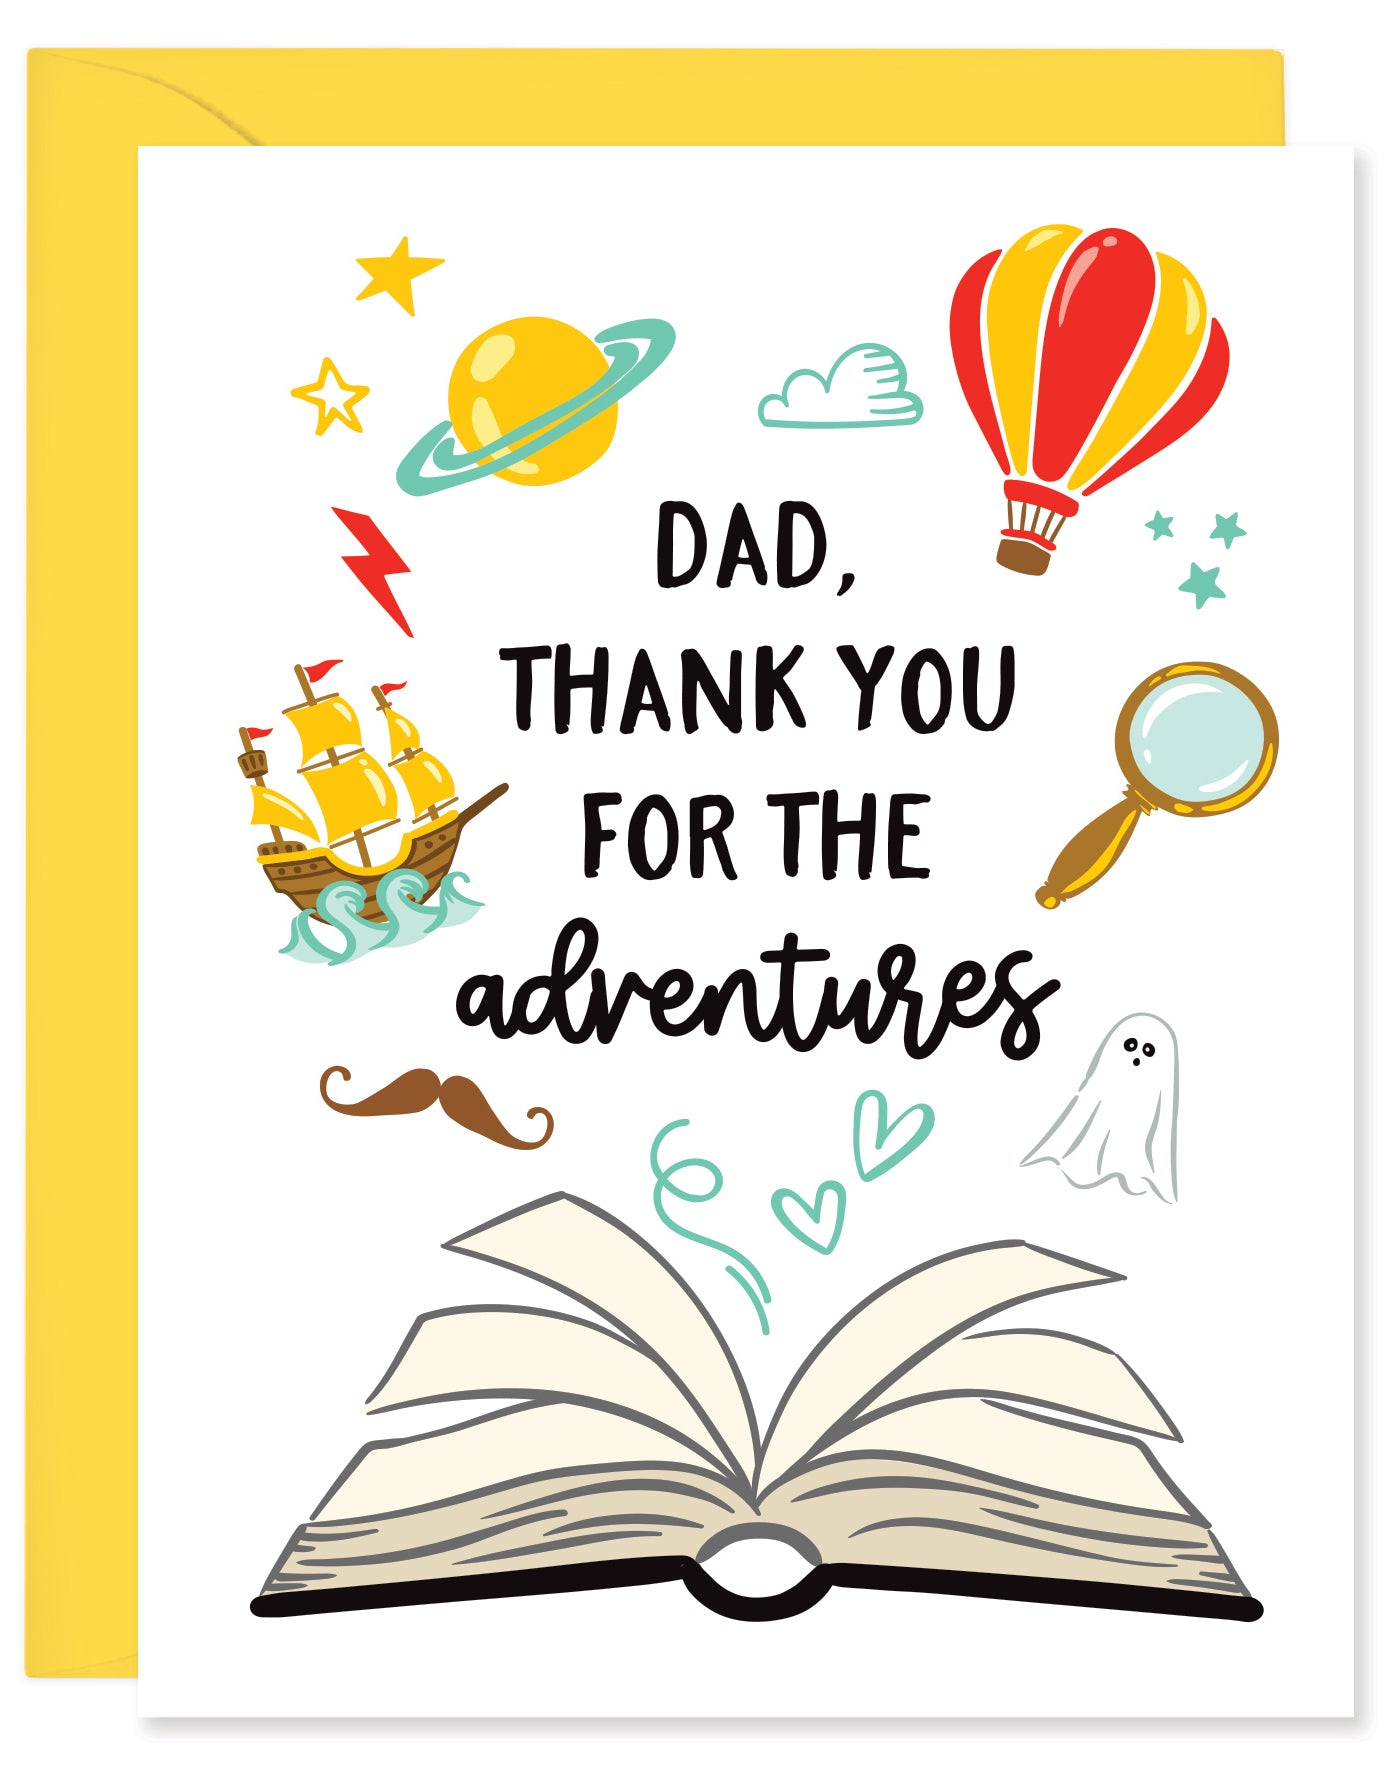 BOOK ADVENTURES FATHER'S DAY CARD